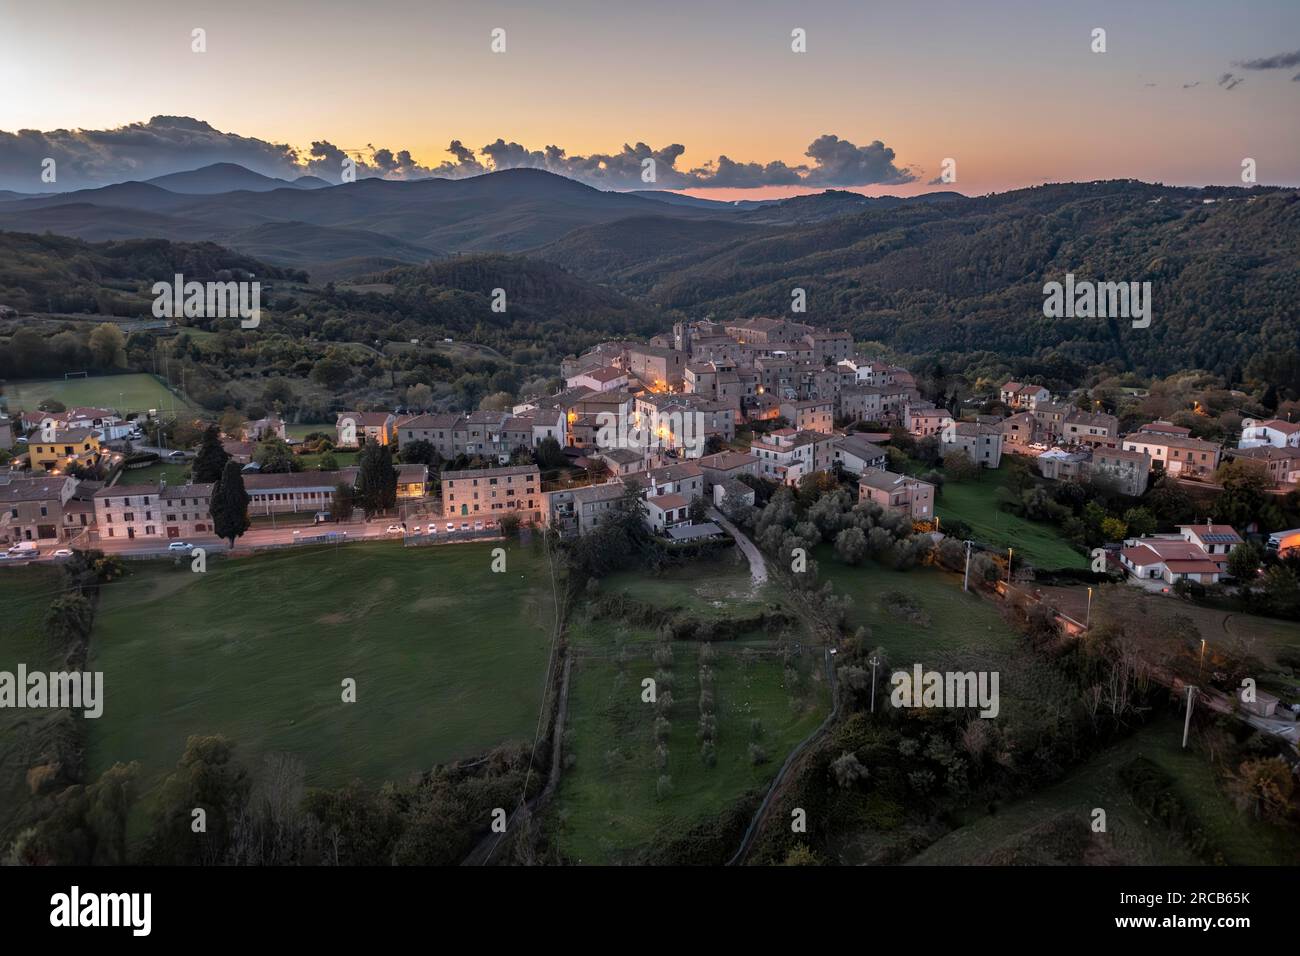 Aerial view, Italy, Tuscany, region of Siena, province of Grosseto, mountain village of Torniella Stock Photo